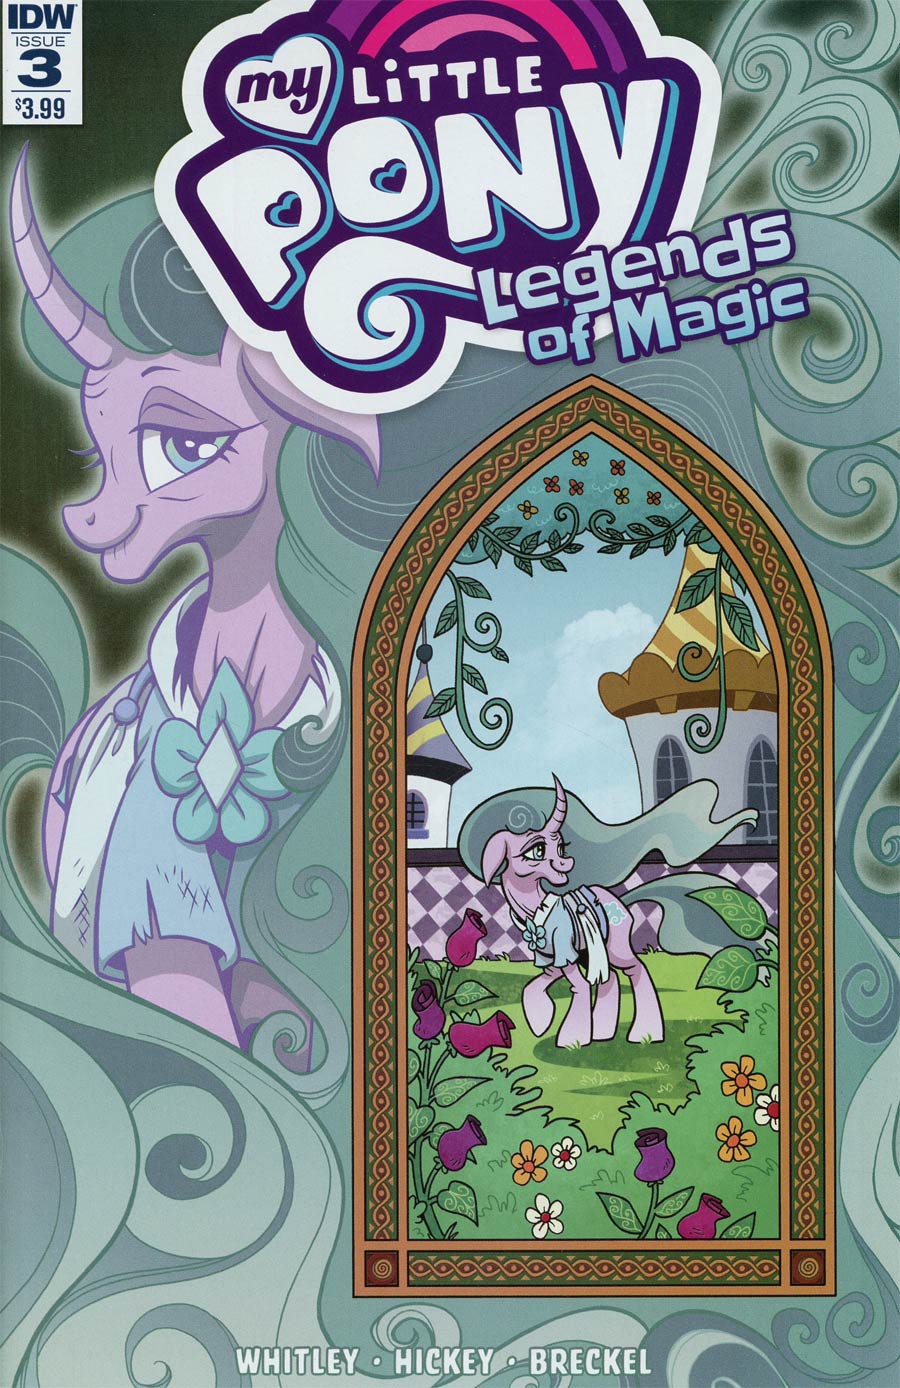 My Little Pony Legends Of Magic #3 Cover A Regular Brenda Hickey Cover